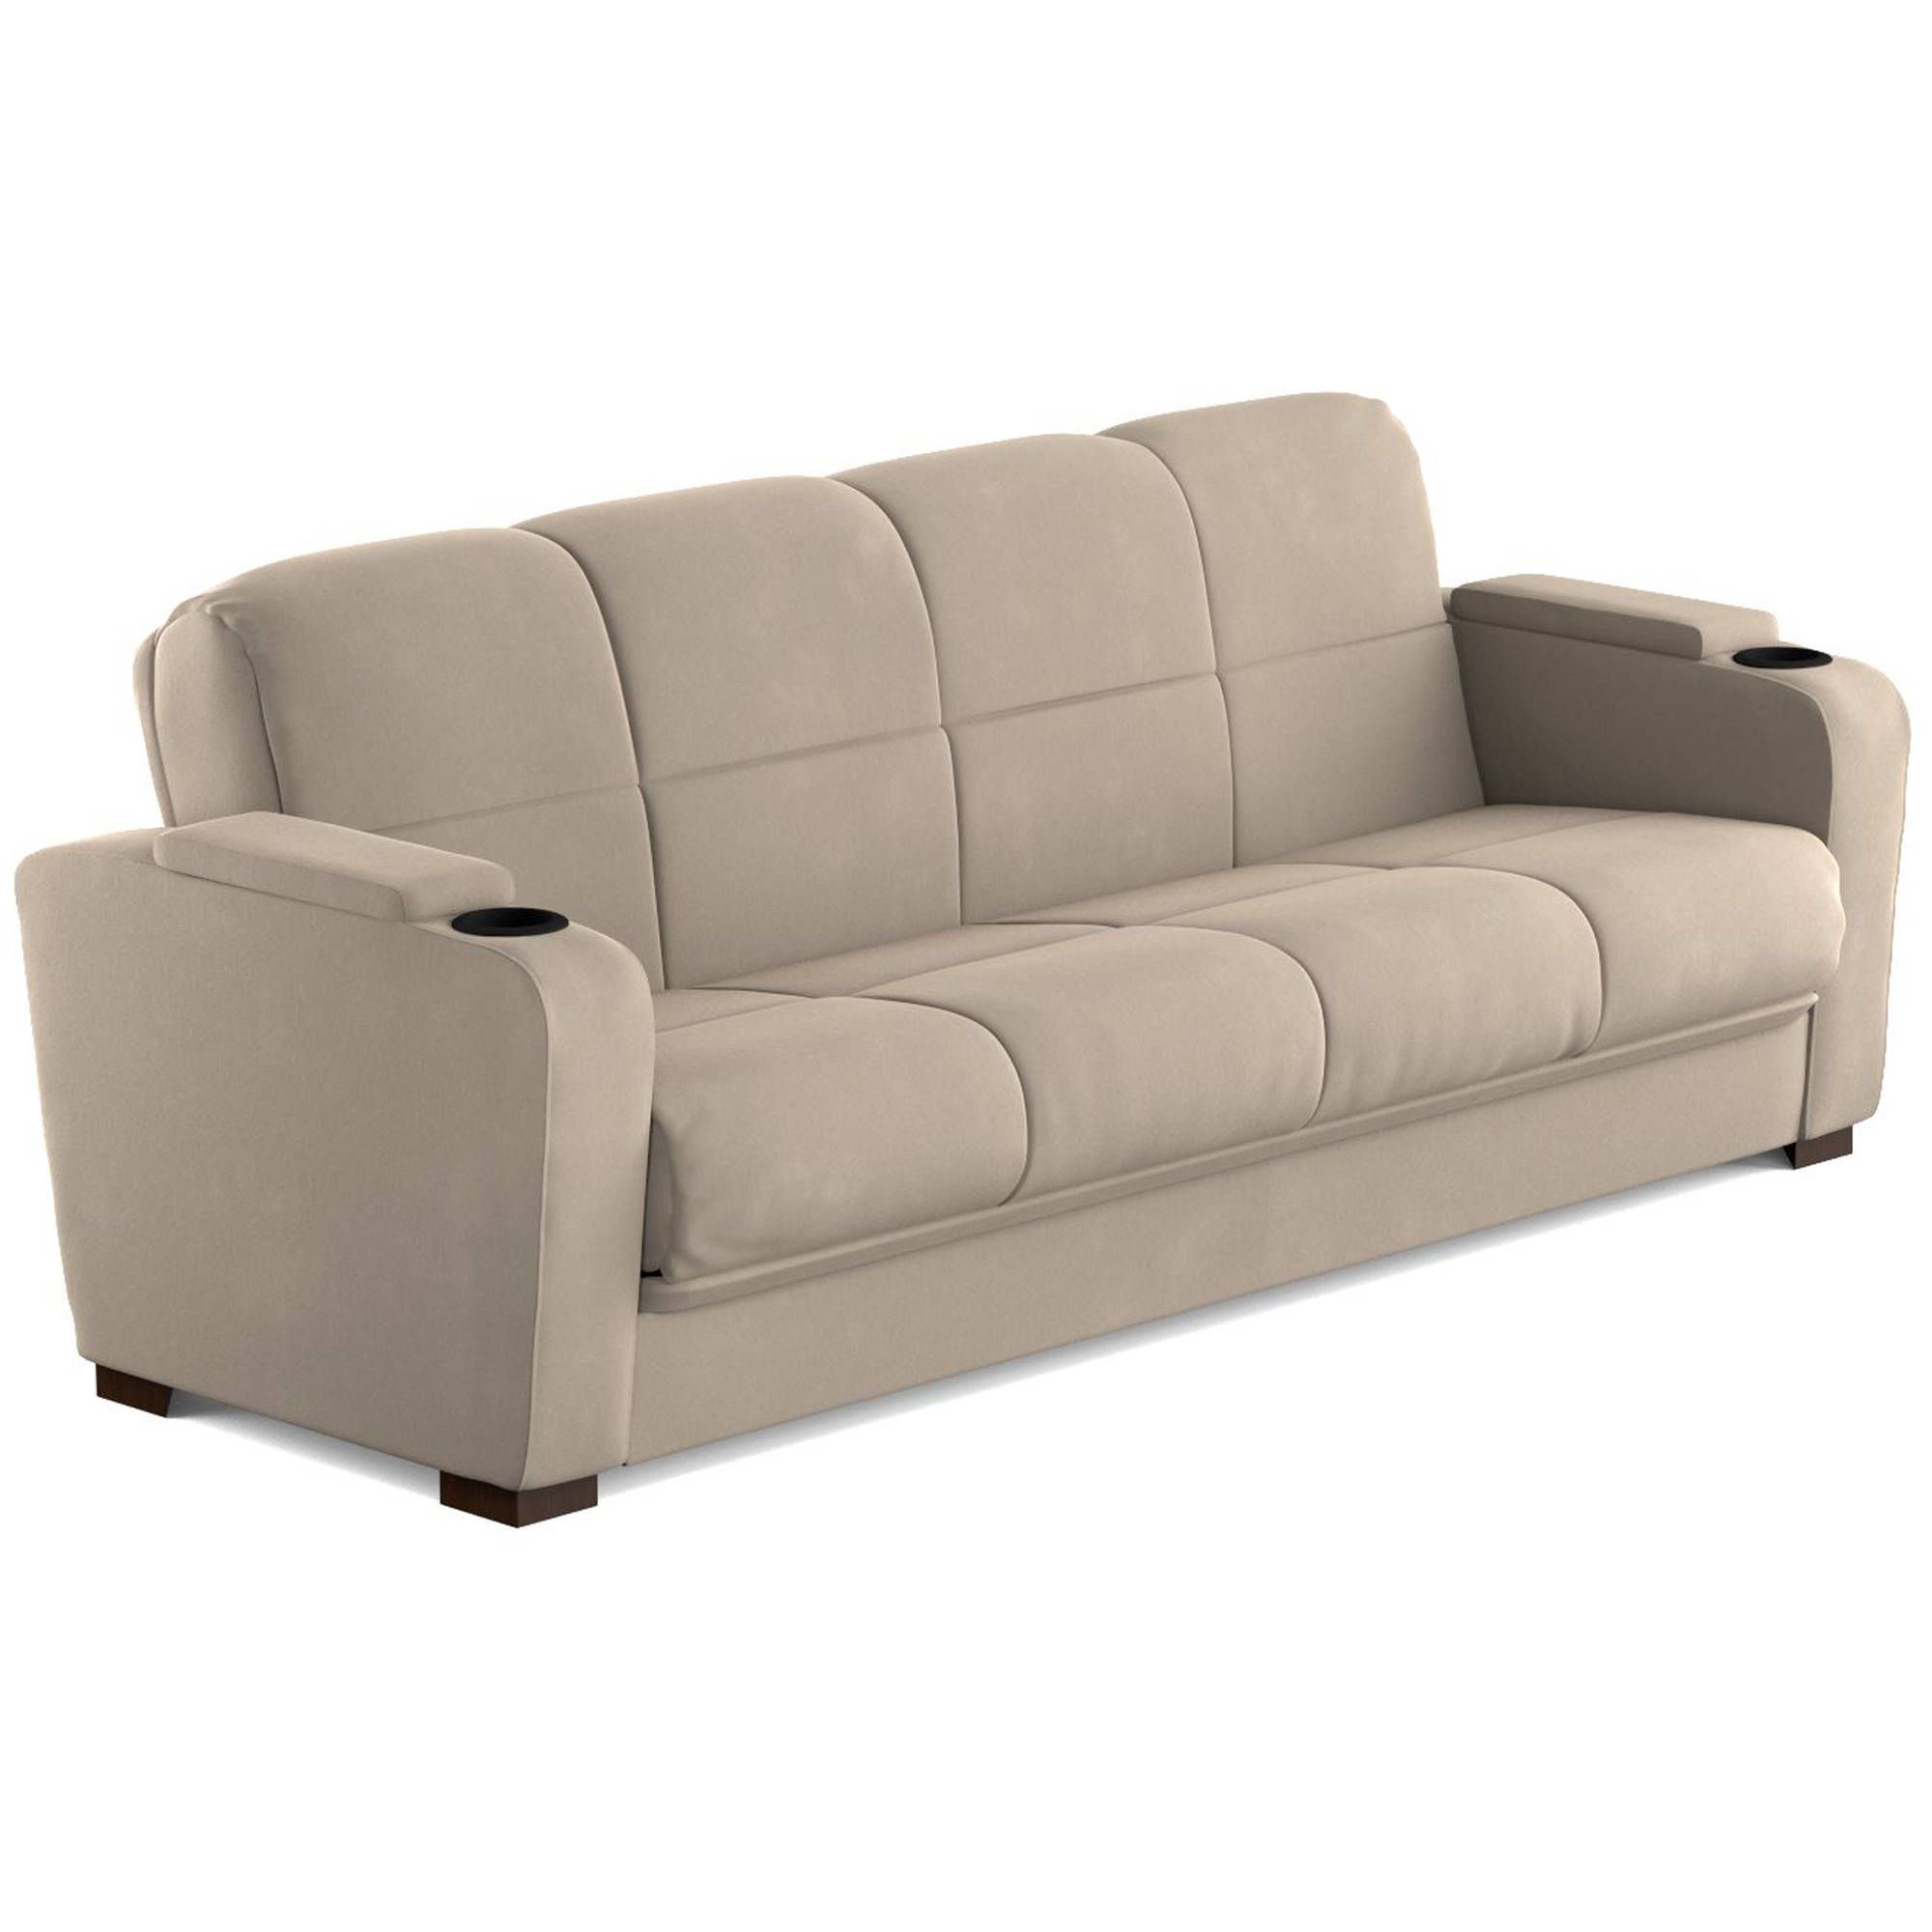 Mainstays Tyler Futon With Storage Sofa Sleeper Bed In Celine Sectional Futon Sofas With Storage Reclining Couch (View 4 of 15)